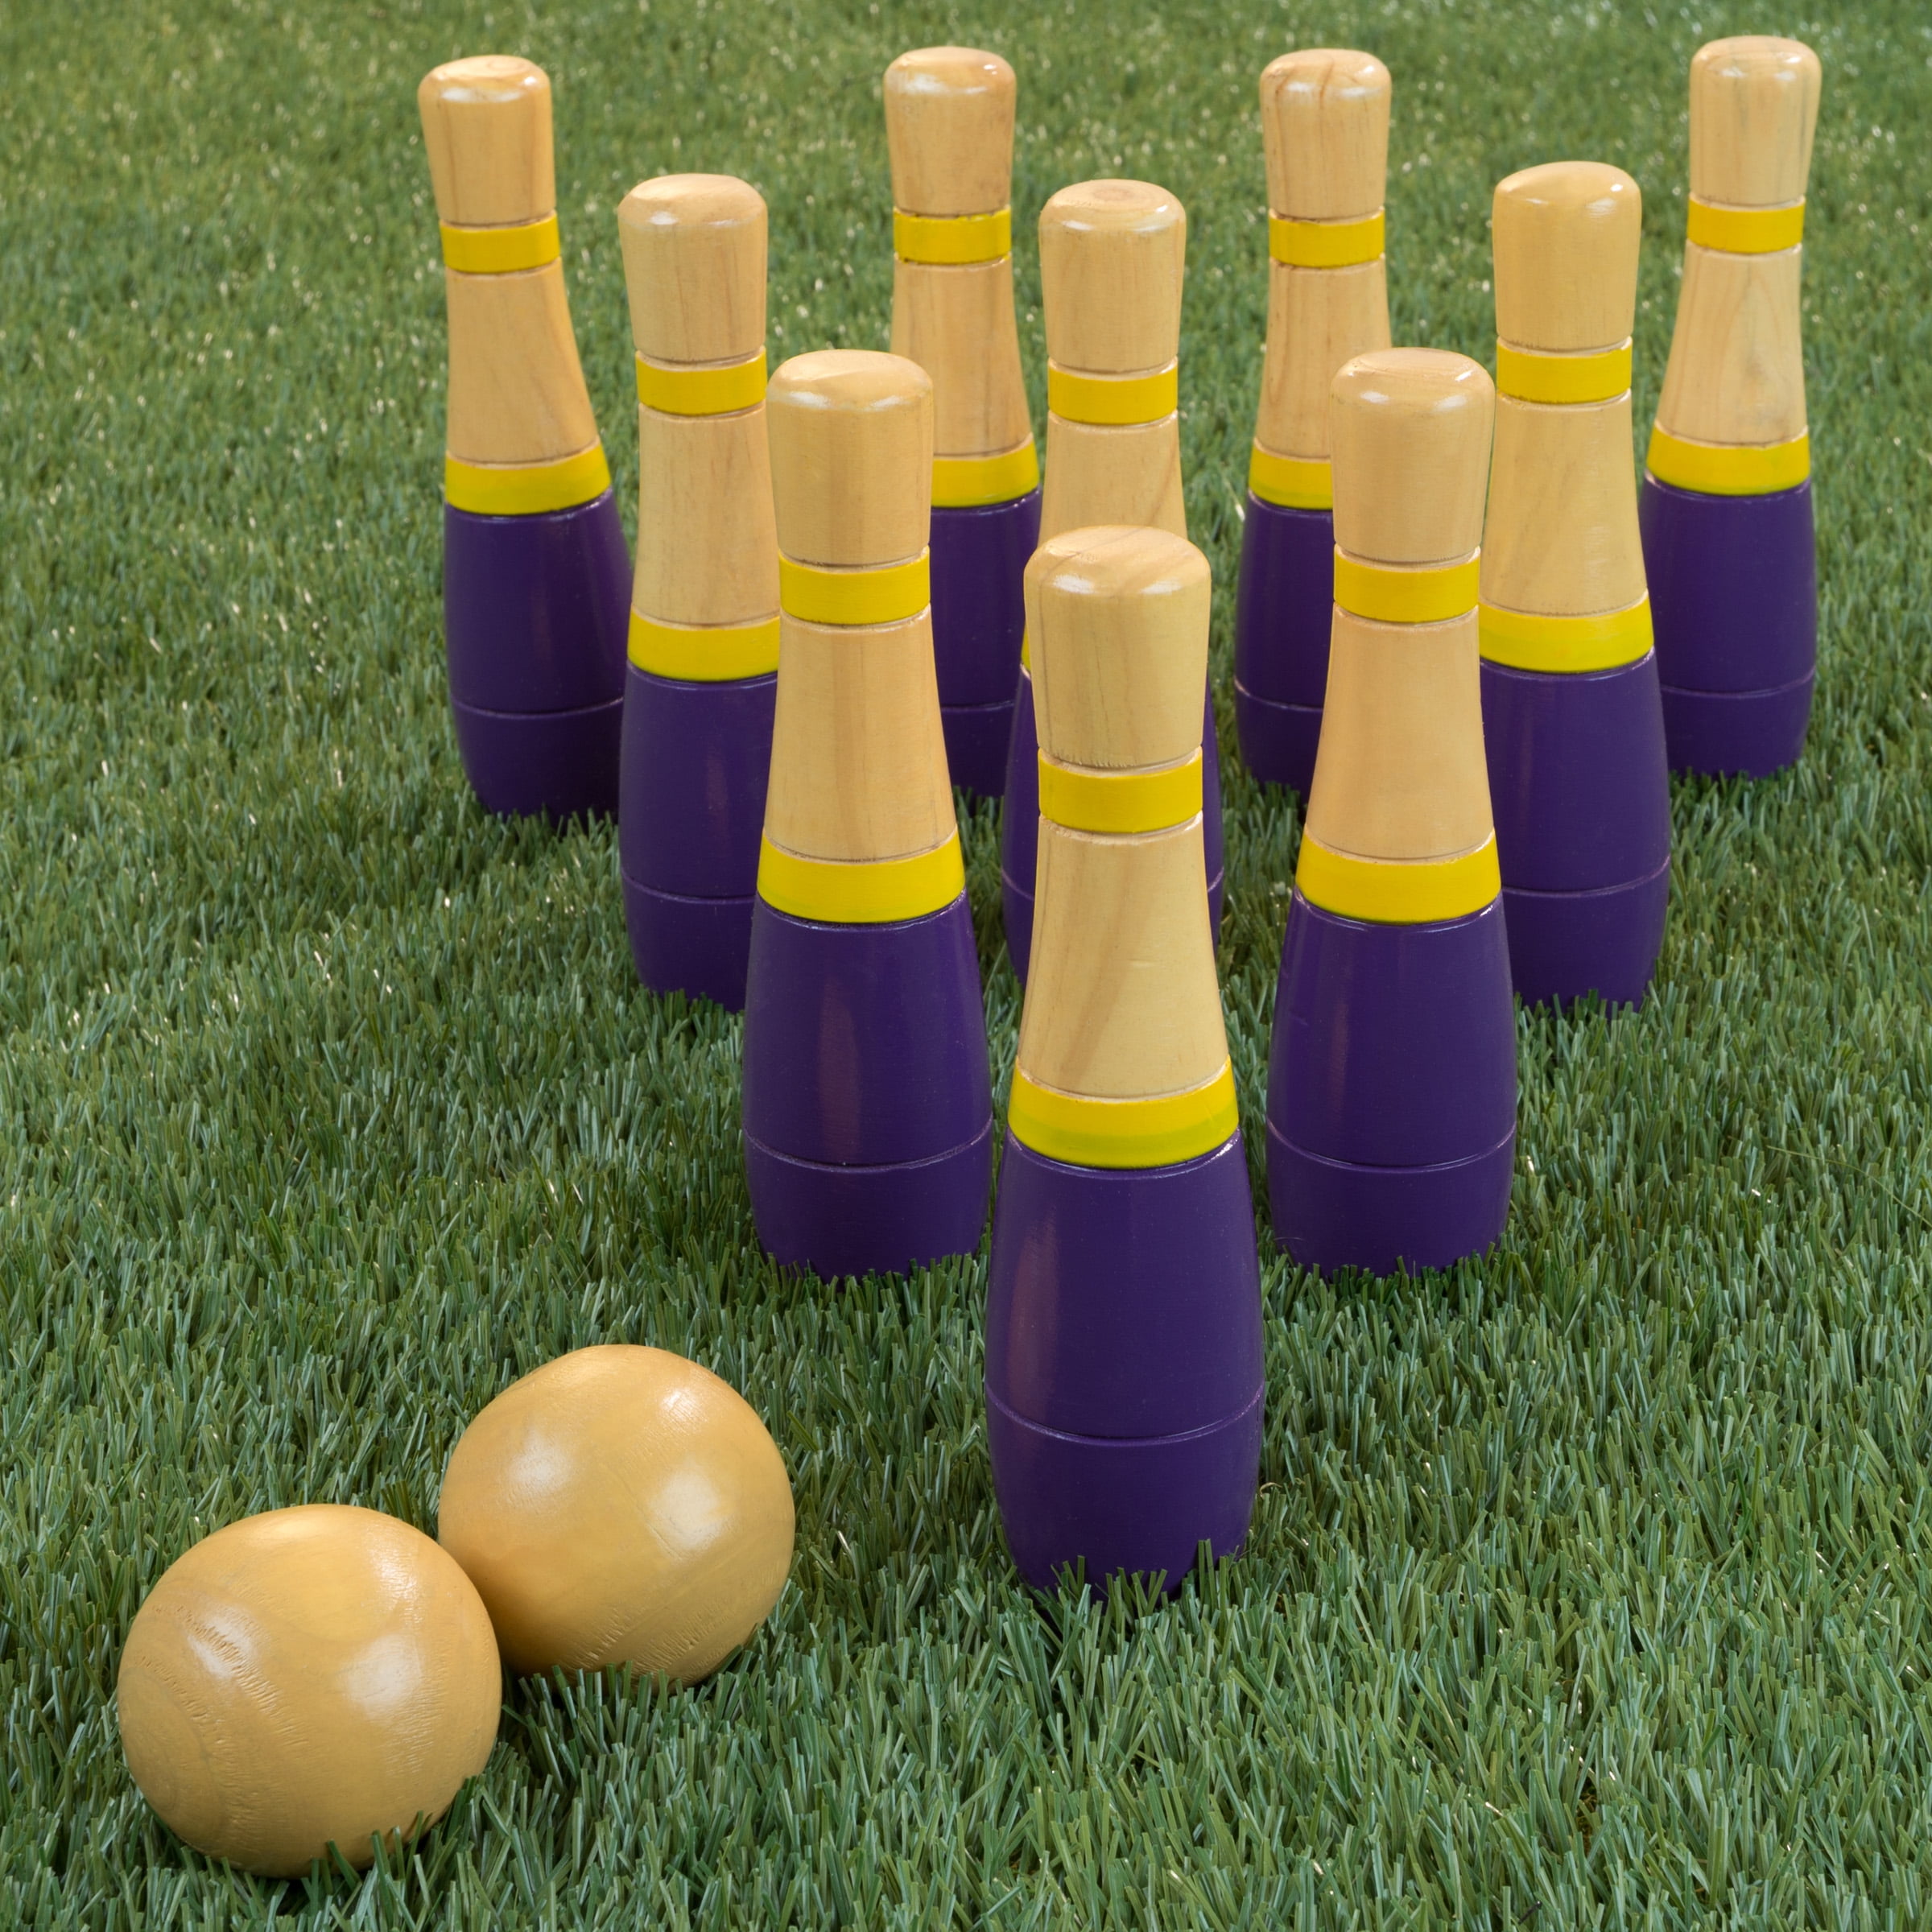 Coca Cola Lawn Bowling Game/Skittle Ball- Indoor and Outdoor Fun for  Toddlers, Kids, Adults –10 Wooden Pins, 2 Balls, and Mesh Bag Set (8 Inch)  - Walmart.com